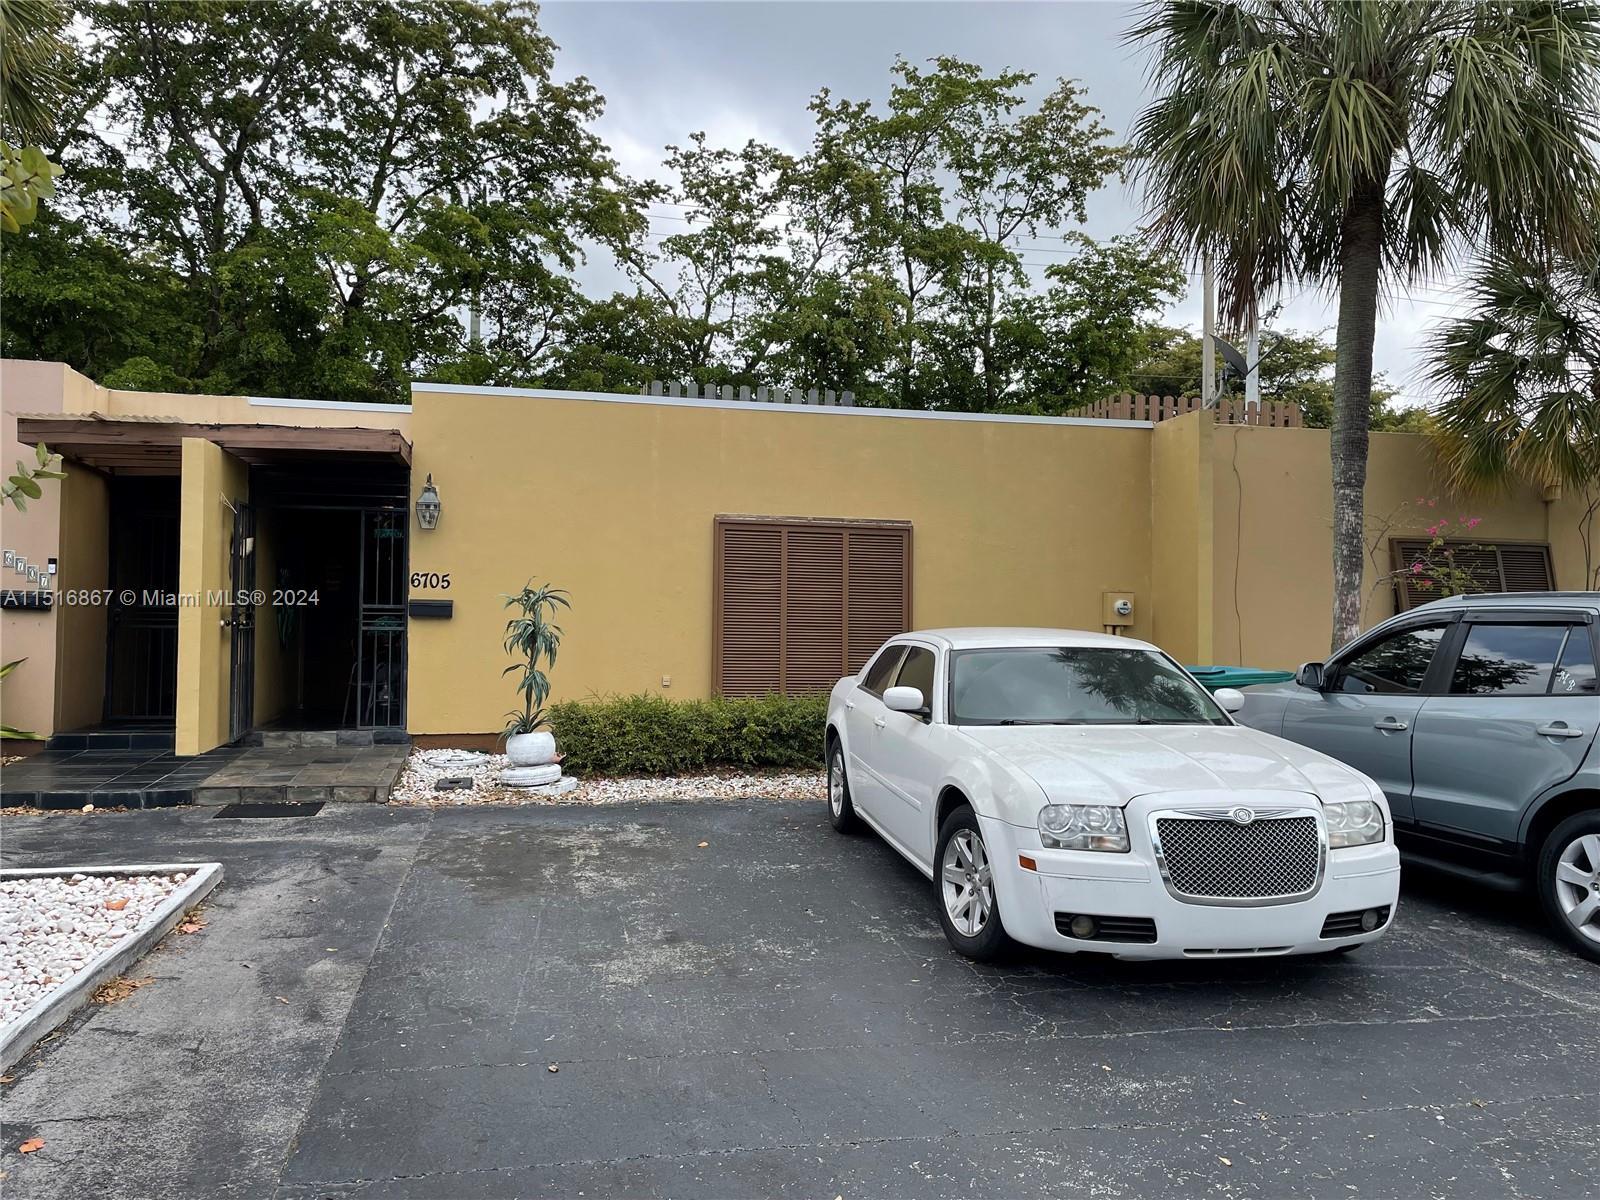 Photo of 6705 Kingsmoor Wy in Miami Lakes, FL